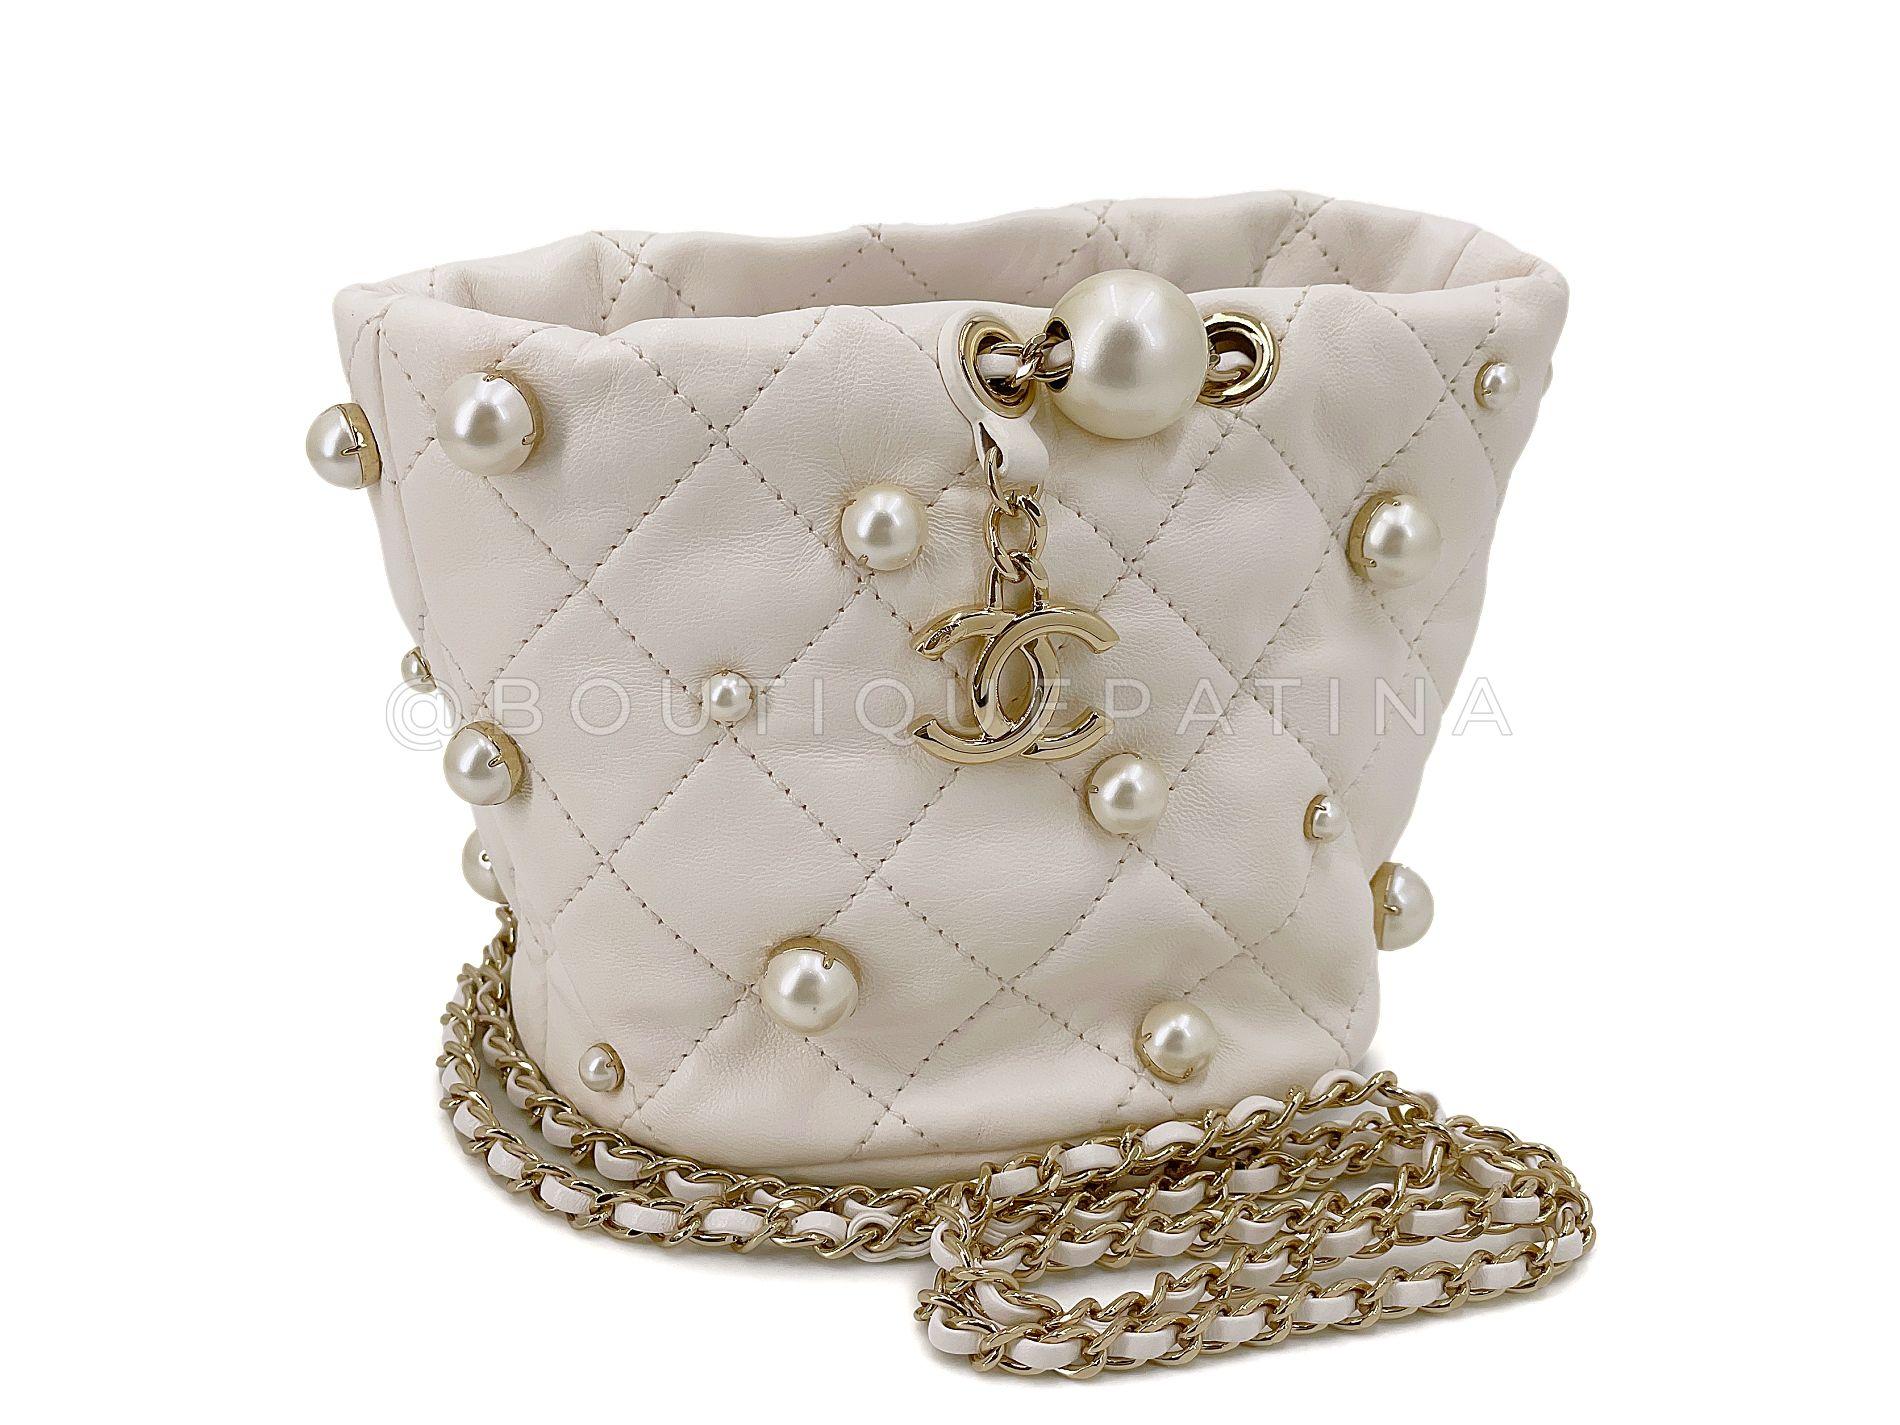 Store item: 67973
Chanel 21S White Cream About Pearls Bucket Bag Mini  is a pillowy soft miniature bucket bag adorned with gold-pronged faux pearls and dangling CC charm hardware, with a woven crossbody strap. 

Perfect for evening or everyday, with